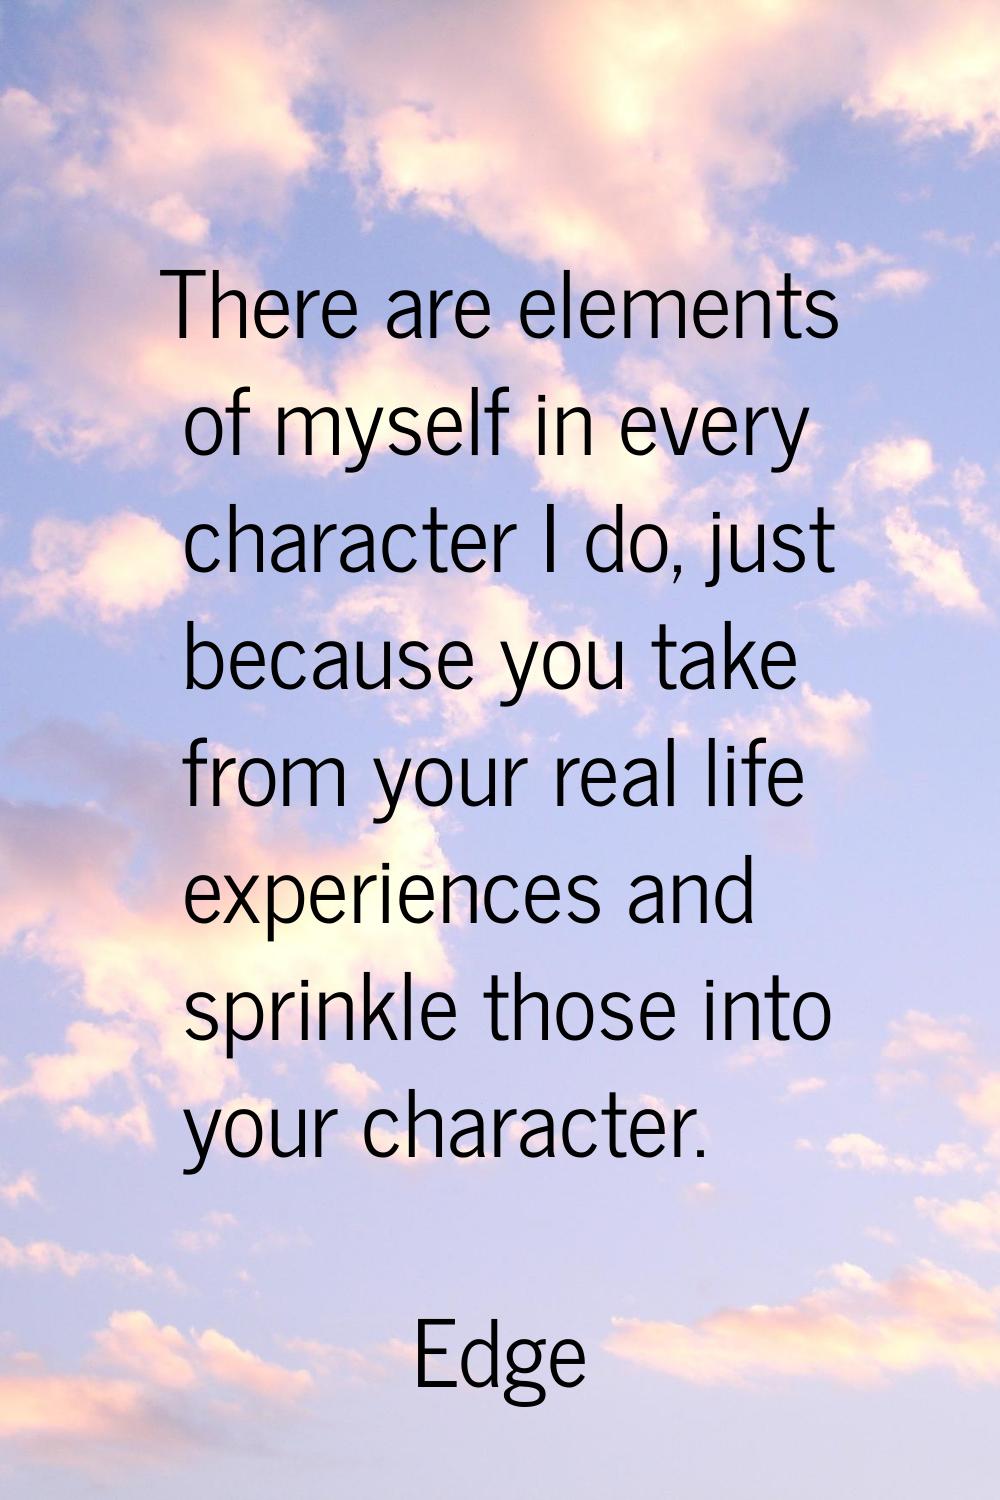 There are elements of myself in every character I do, just because you take from your real life exp